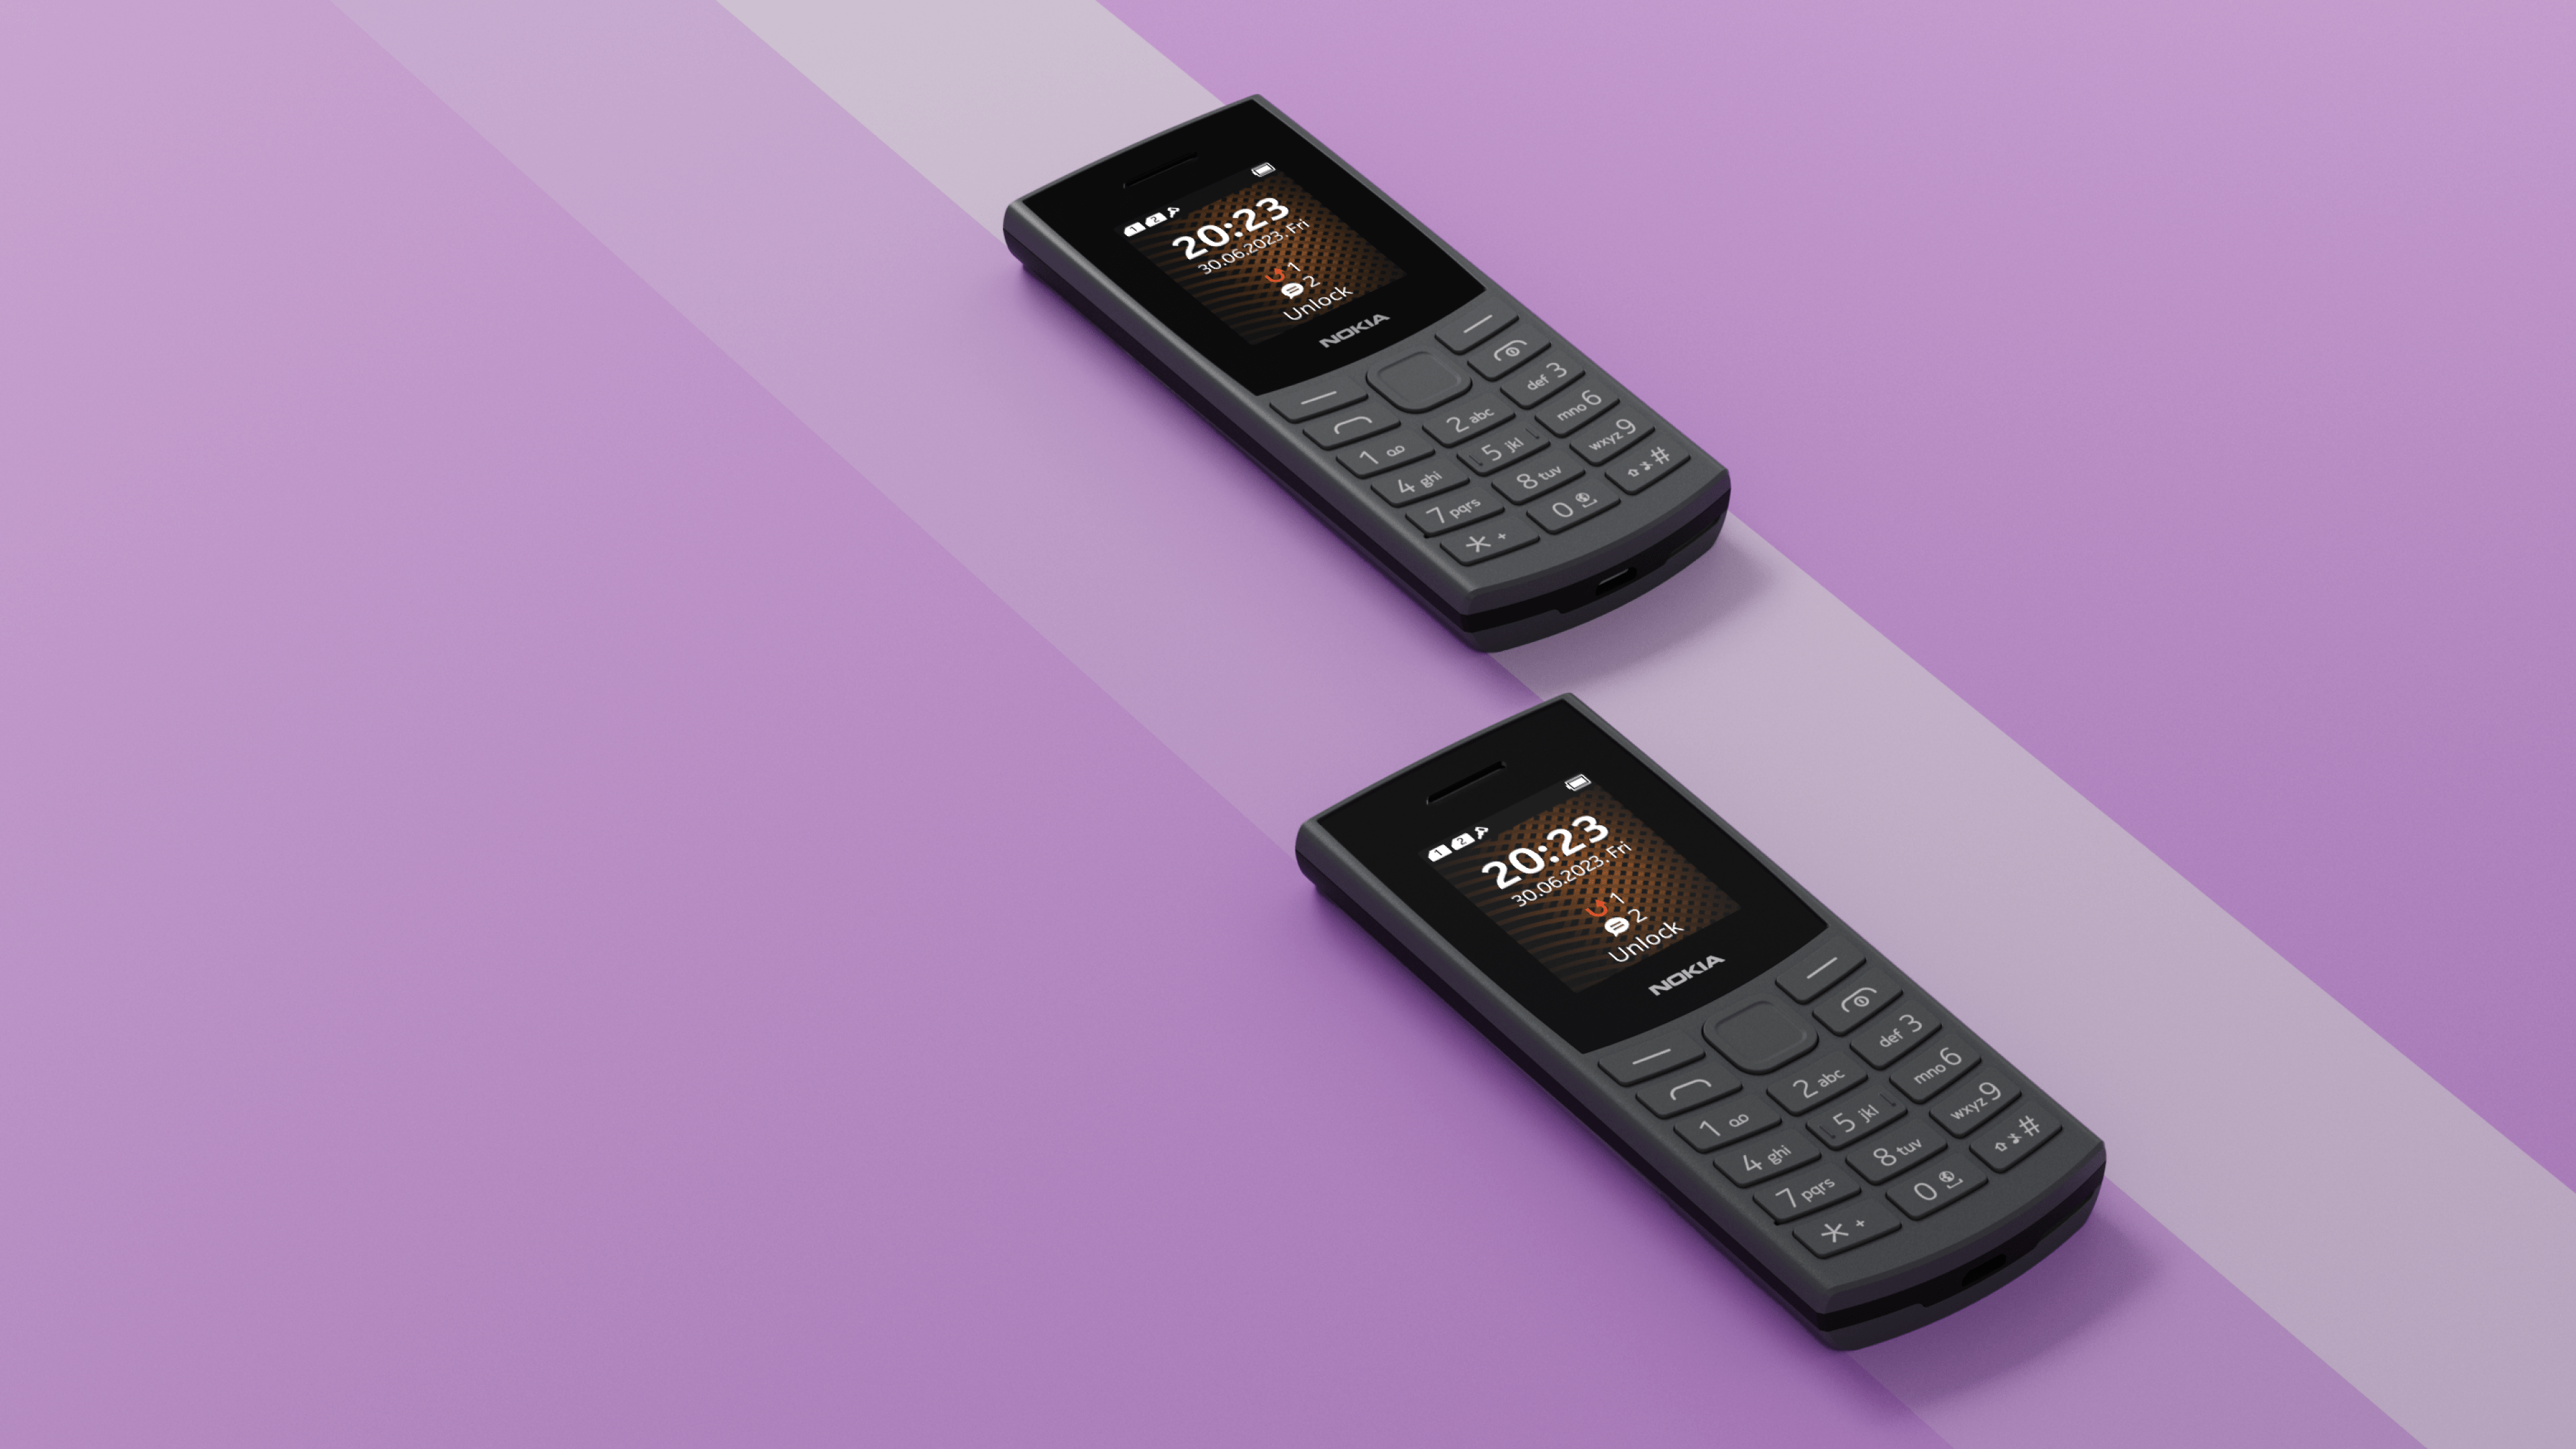 Nokia 105 feature phone 4G with internet